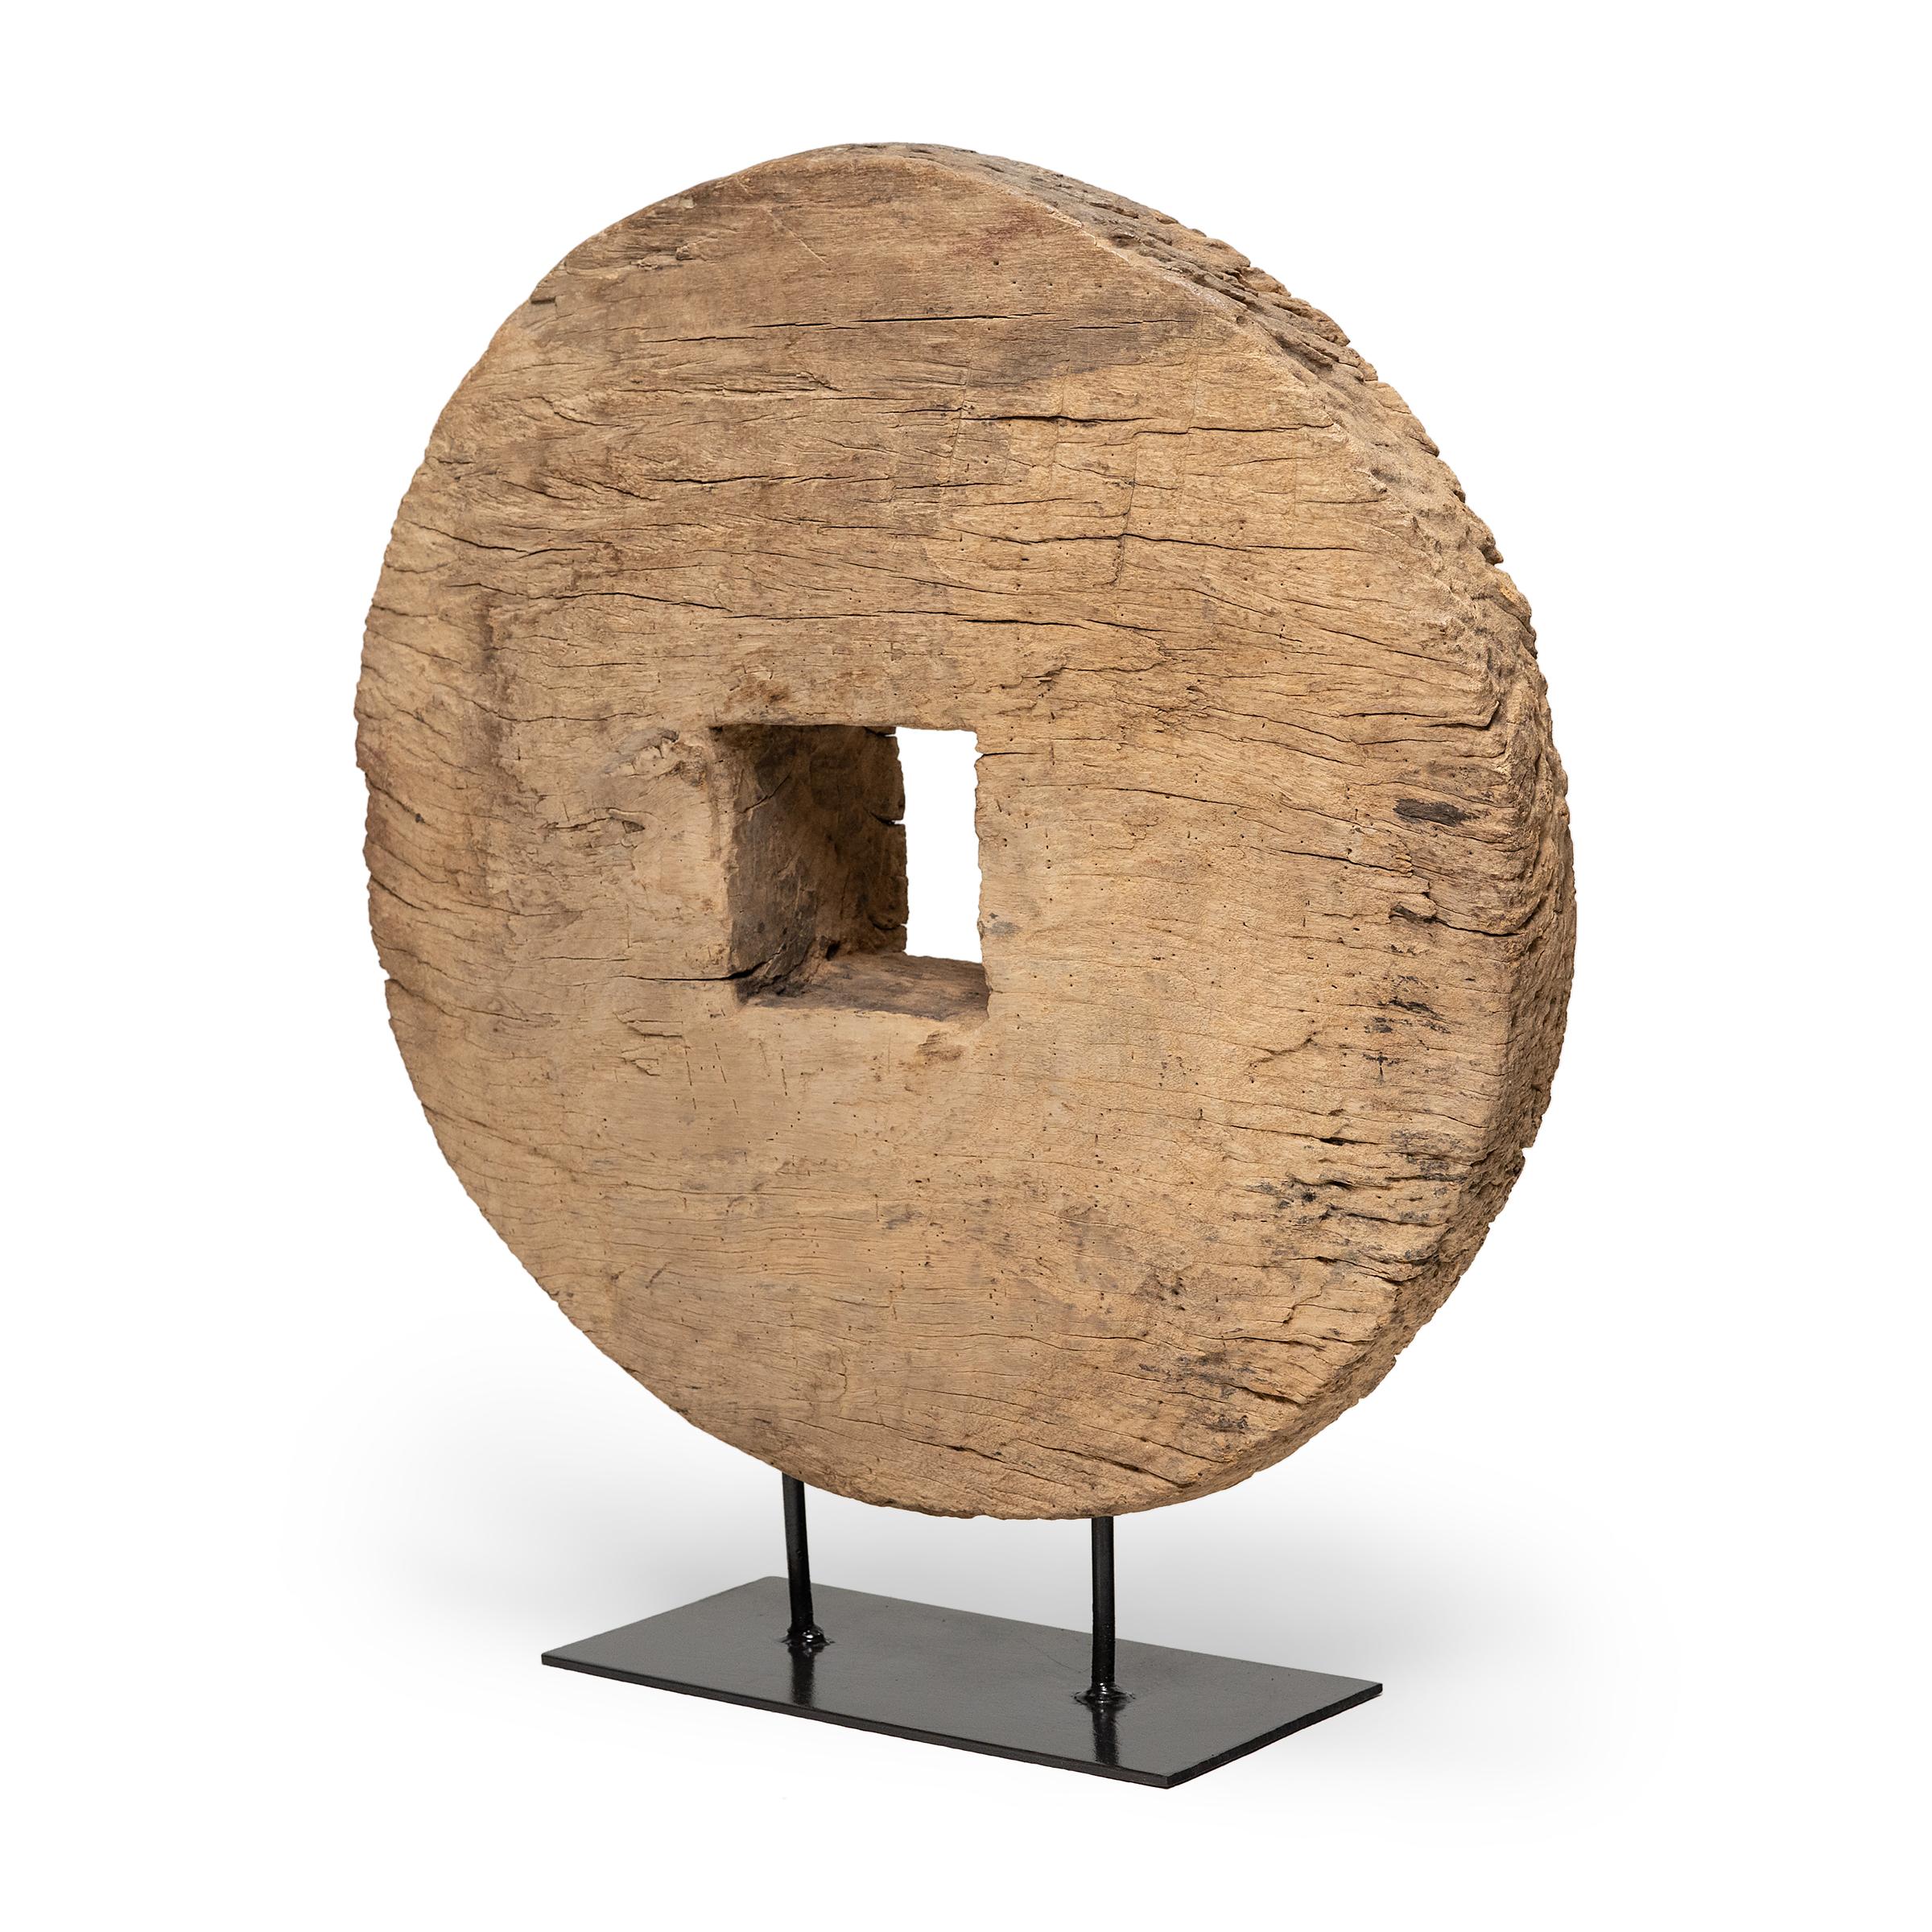 This large 19th-century wooden farm cart wheel captivates with simple lines and wabi-sabi textures. The expressive grain of Chinese northern elm (yumu) is on full display, beautifully aged with deep grooves and softened by a rich patina. Elevated by